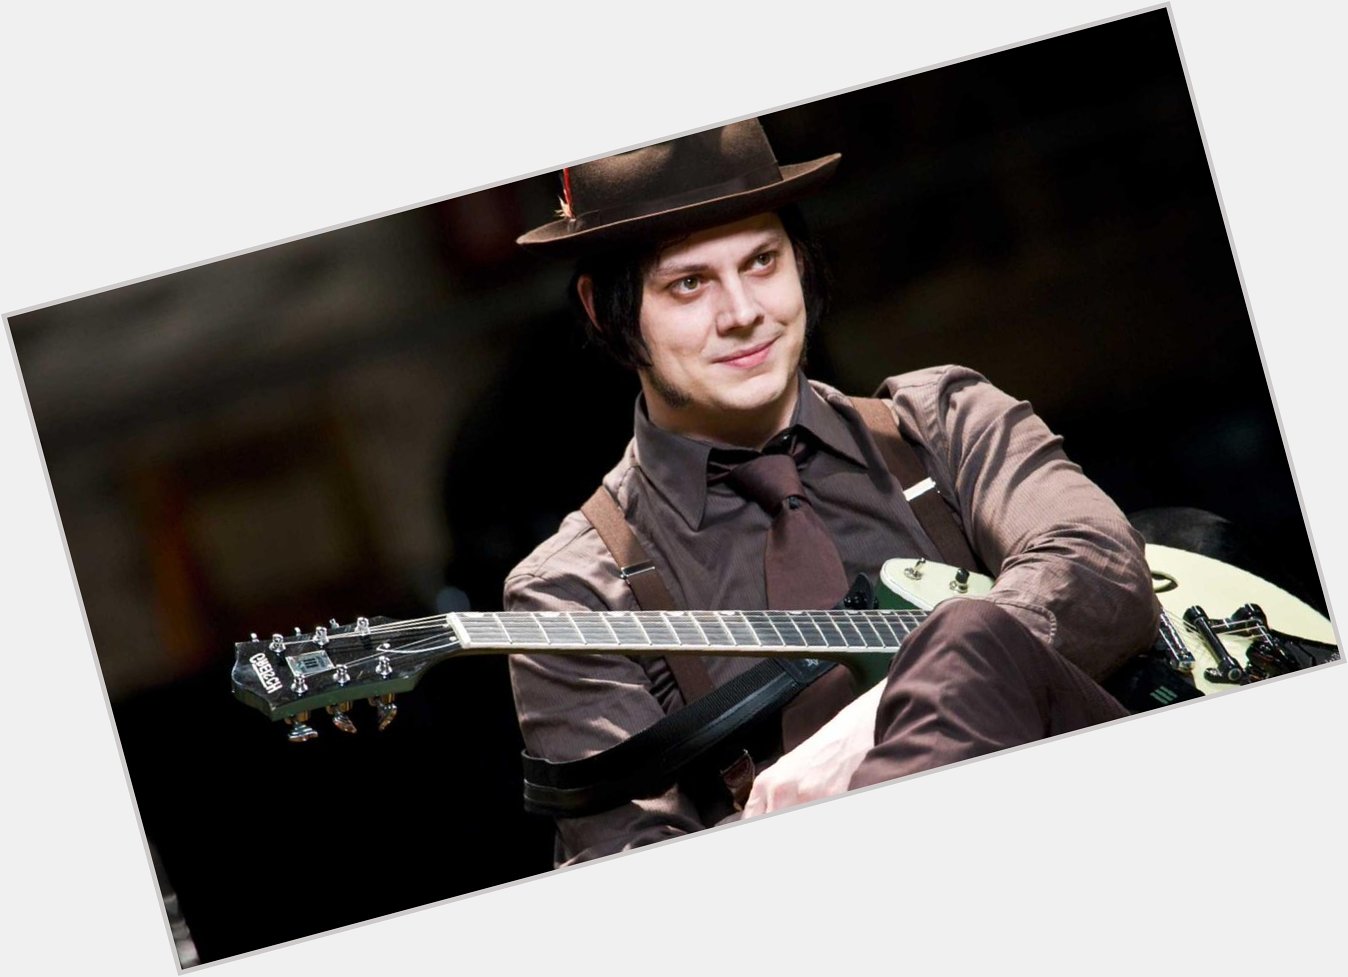 40 years young! Happy Birthday to one of the most important men alive in American Music- Jack White.  